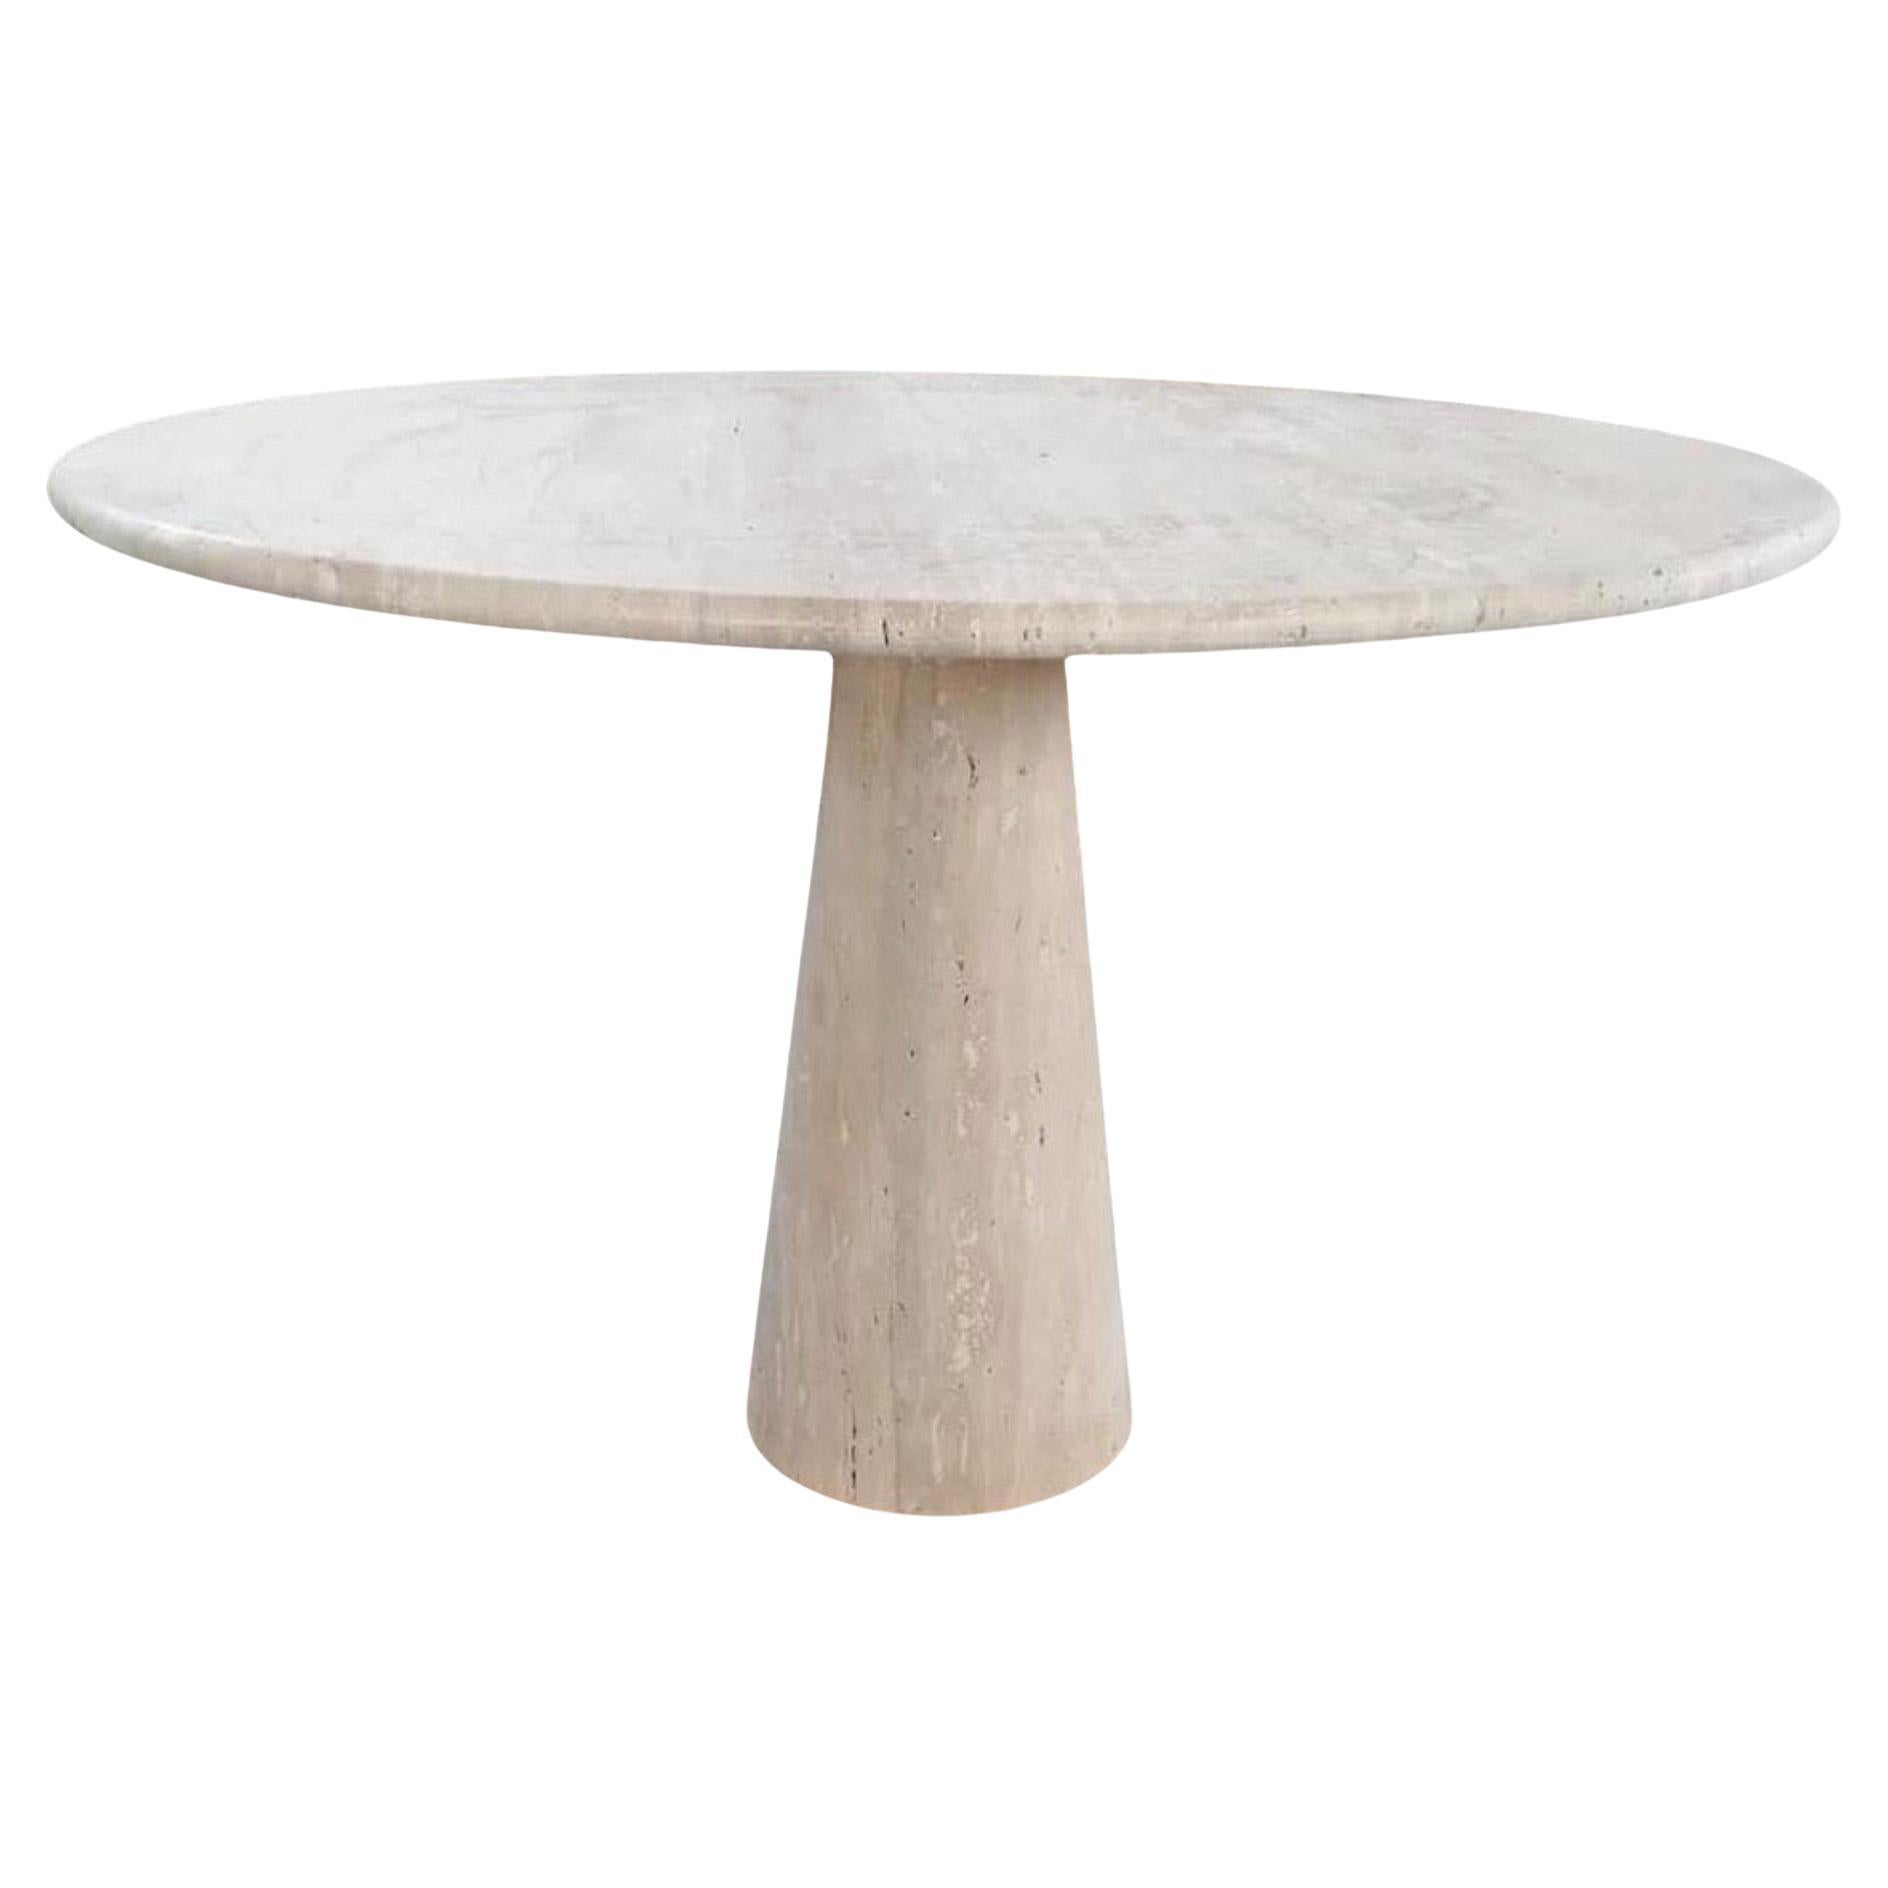 Bespoke Round Italian Travertine Dining Table For Sale